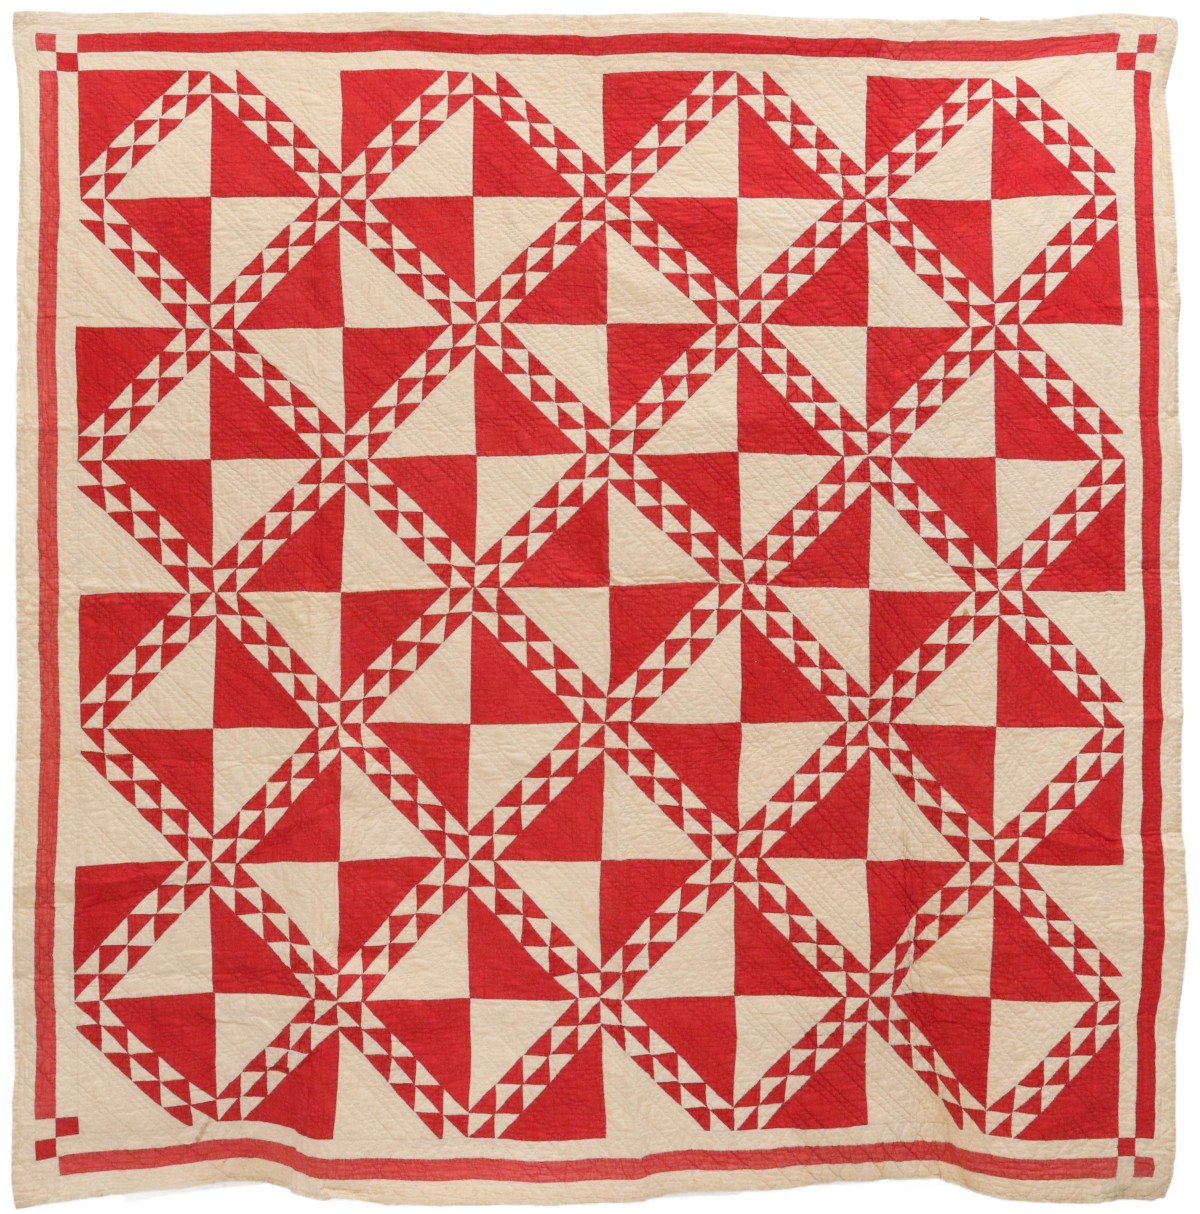 AN ANTIQUE 'LINTON' PATTERN RED AND WHITE QUILT - PLUS